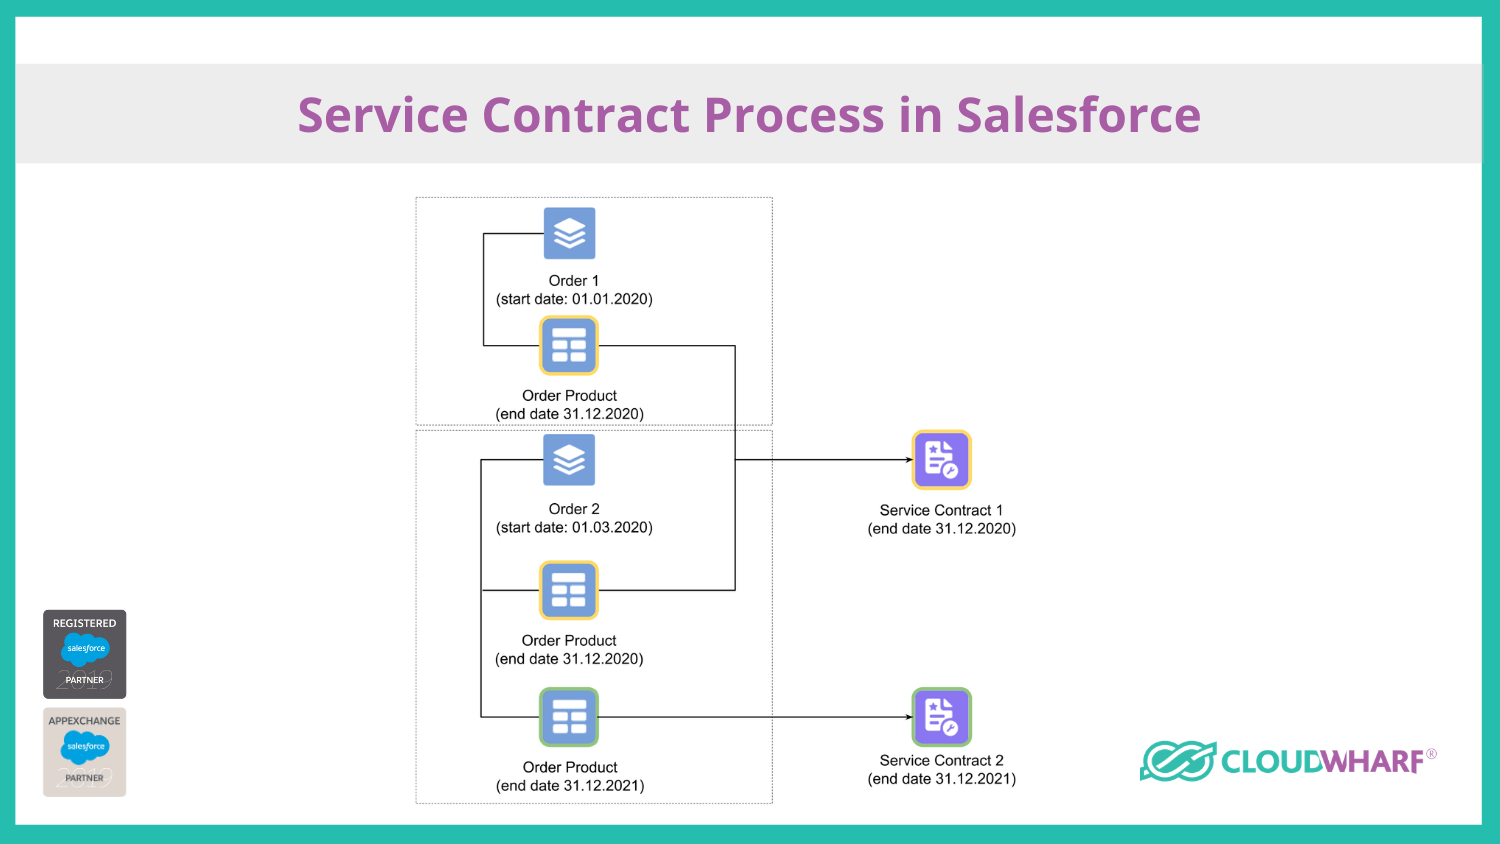 Service Contract process in Salesforce,bulk orders, maintenance management